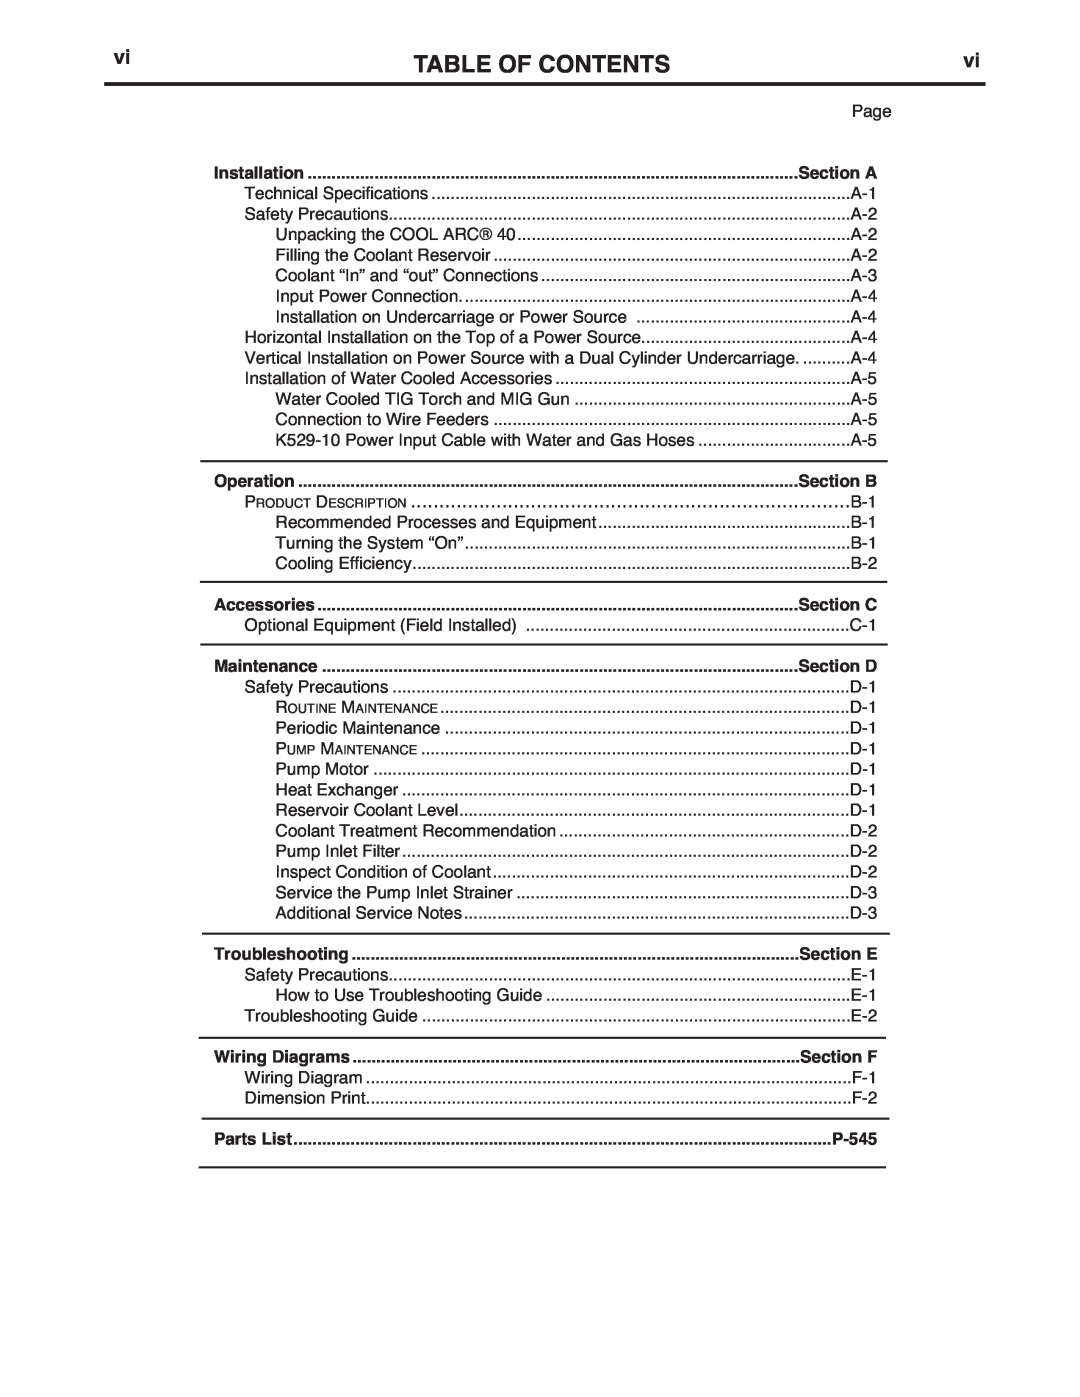 Lincoln Electric IM911 manual Table Of Contents, Product Description, Section E, Section F, P-545 